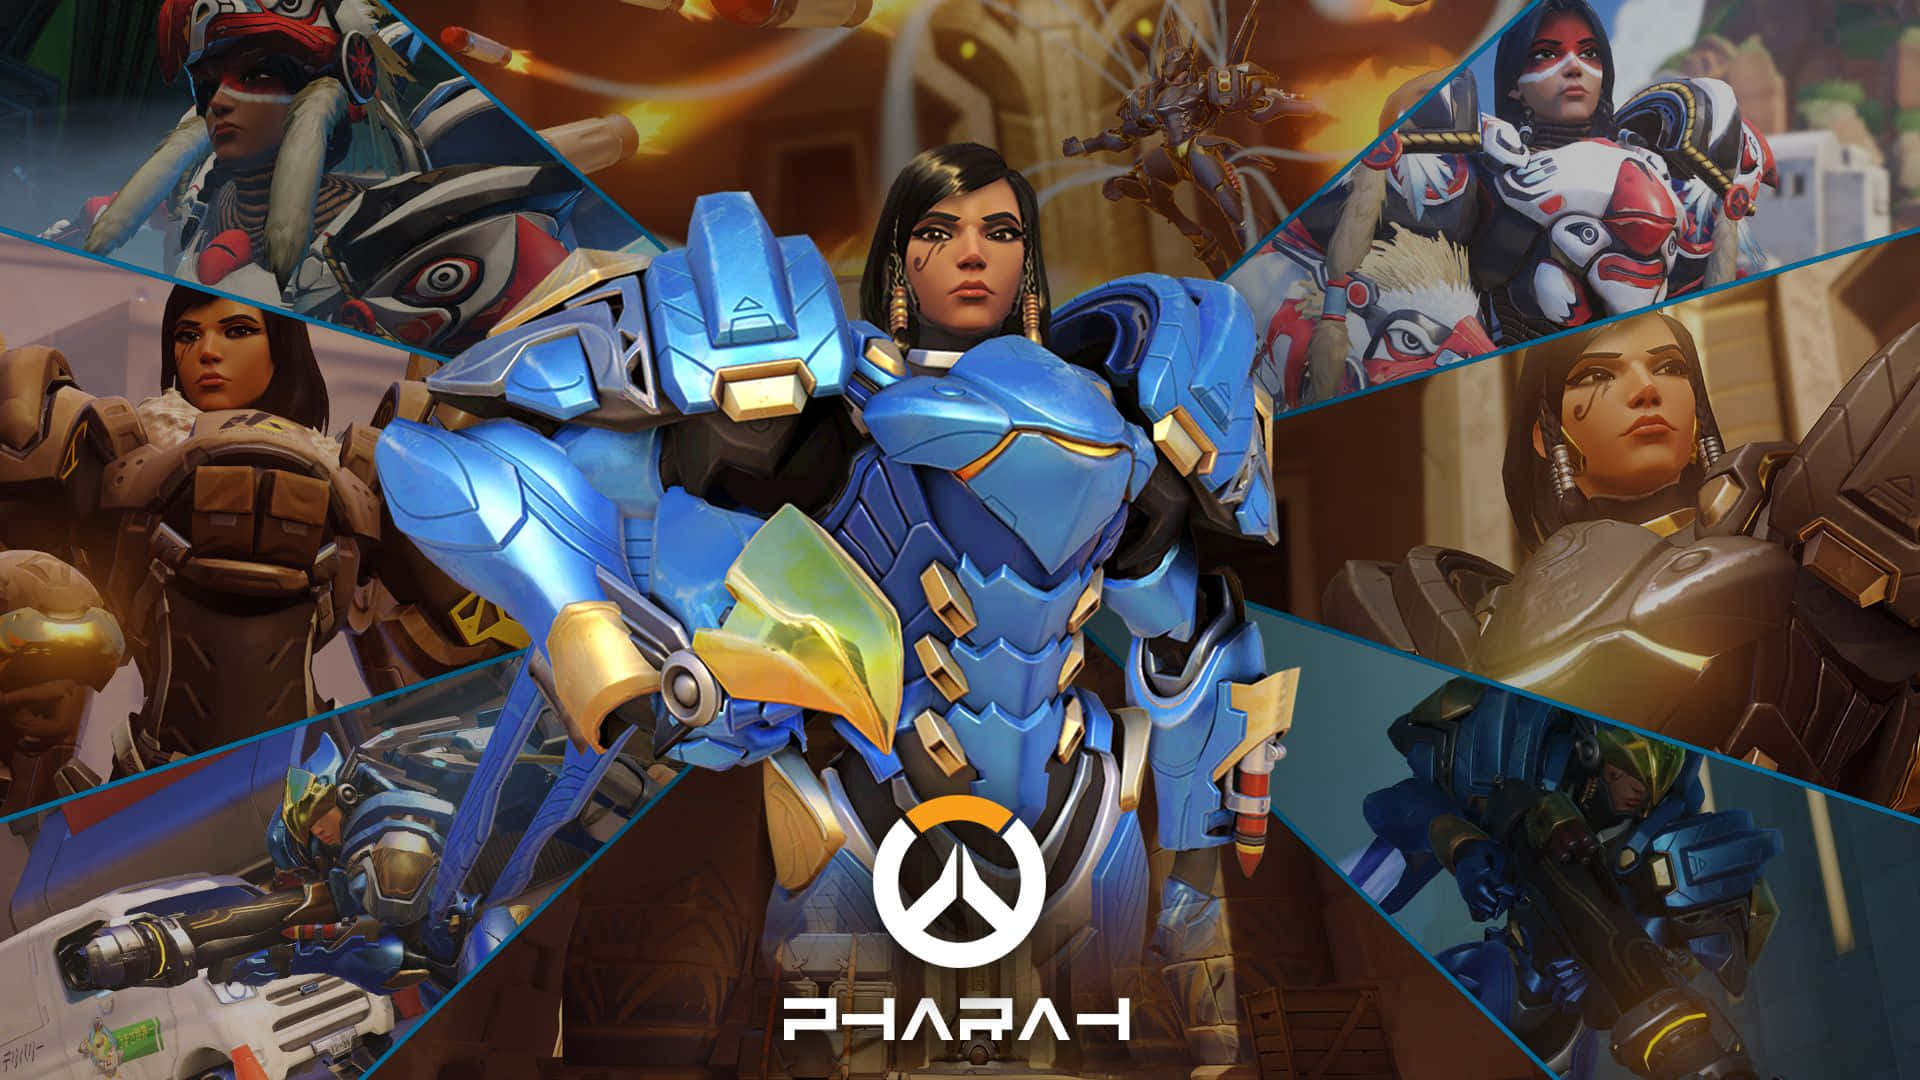 Soaring High with Pharah in Overwatch Wallpaper